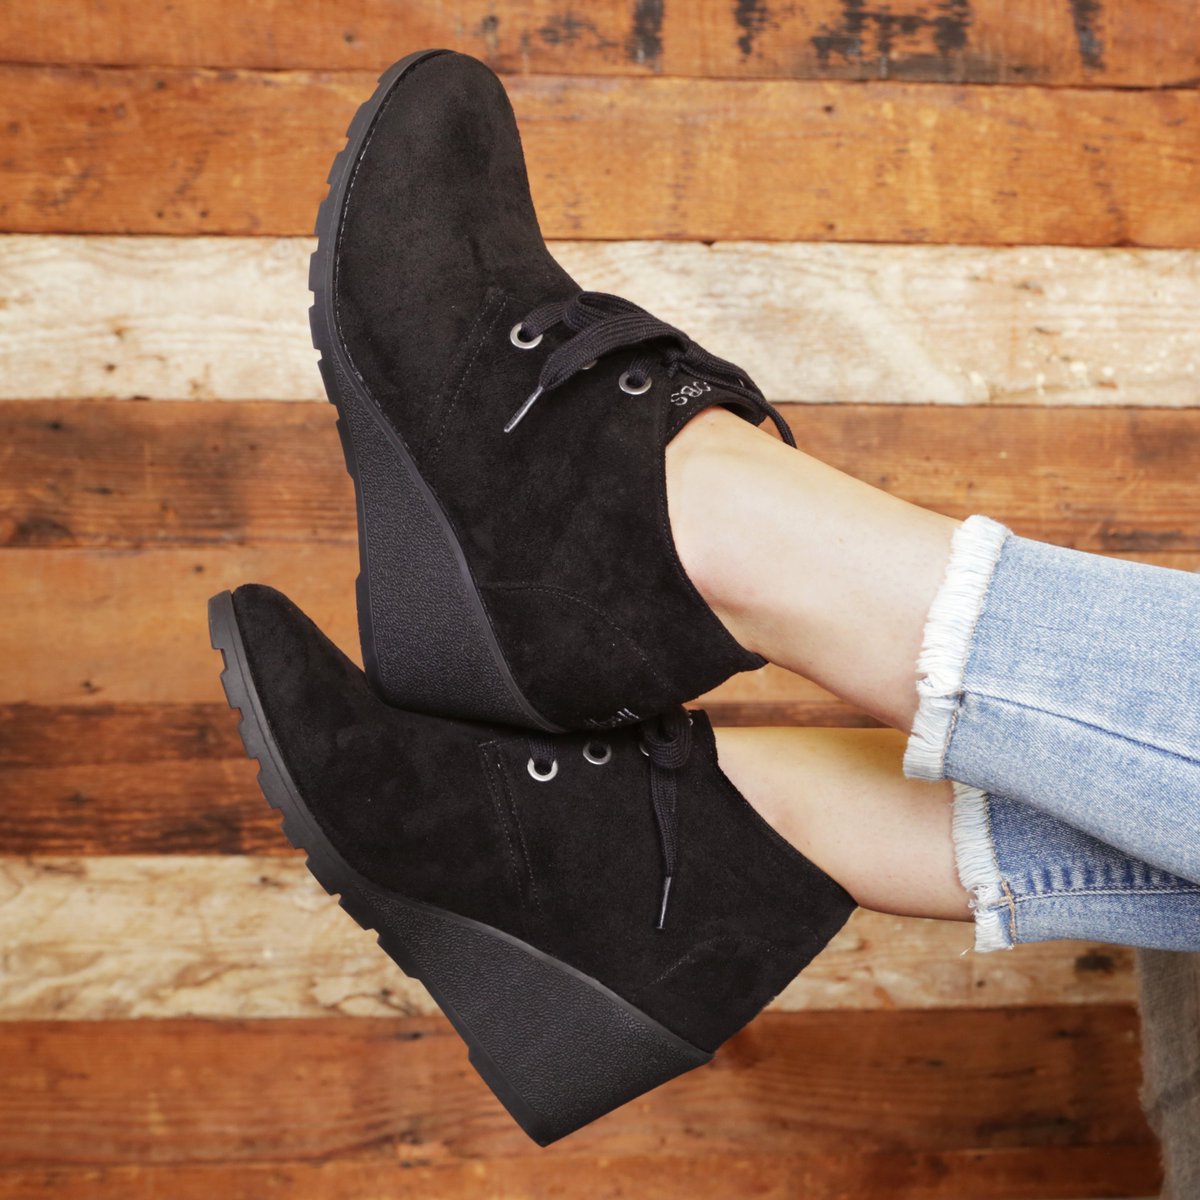 fuerte abuela Embajada BOBS from SKECHERS on Twitter: "The Tumble Weed - Urban Rugged wedges add  the right amount of flair to any outfit. Snag these while you can 😍  https://t.co/EQn4LIr5GC" / Twitter